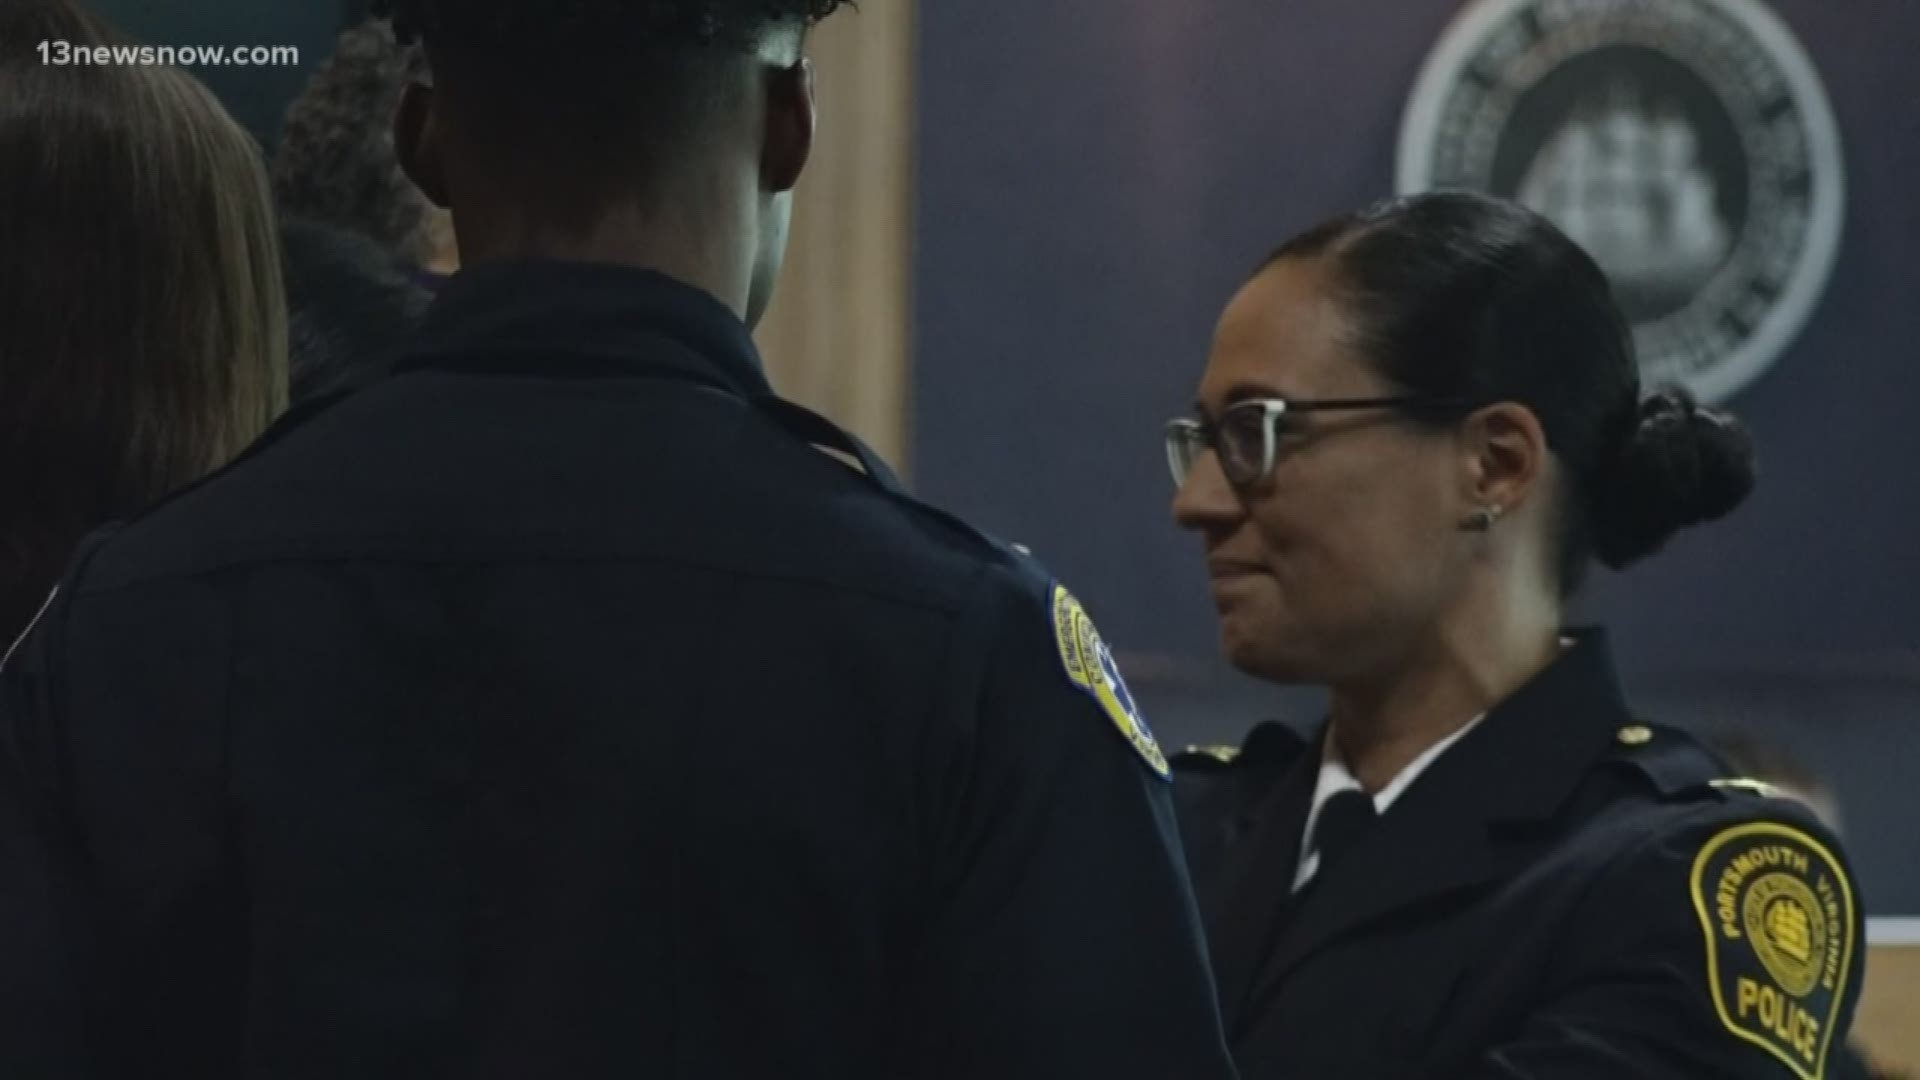 Angele Greene was officially sworn in as the city's new chief of police.